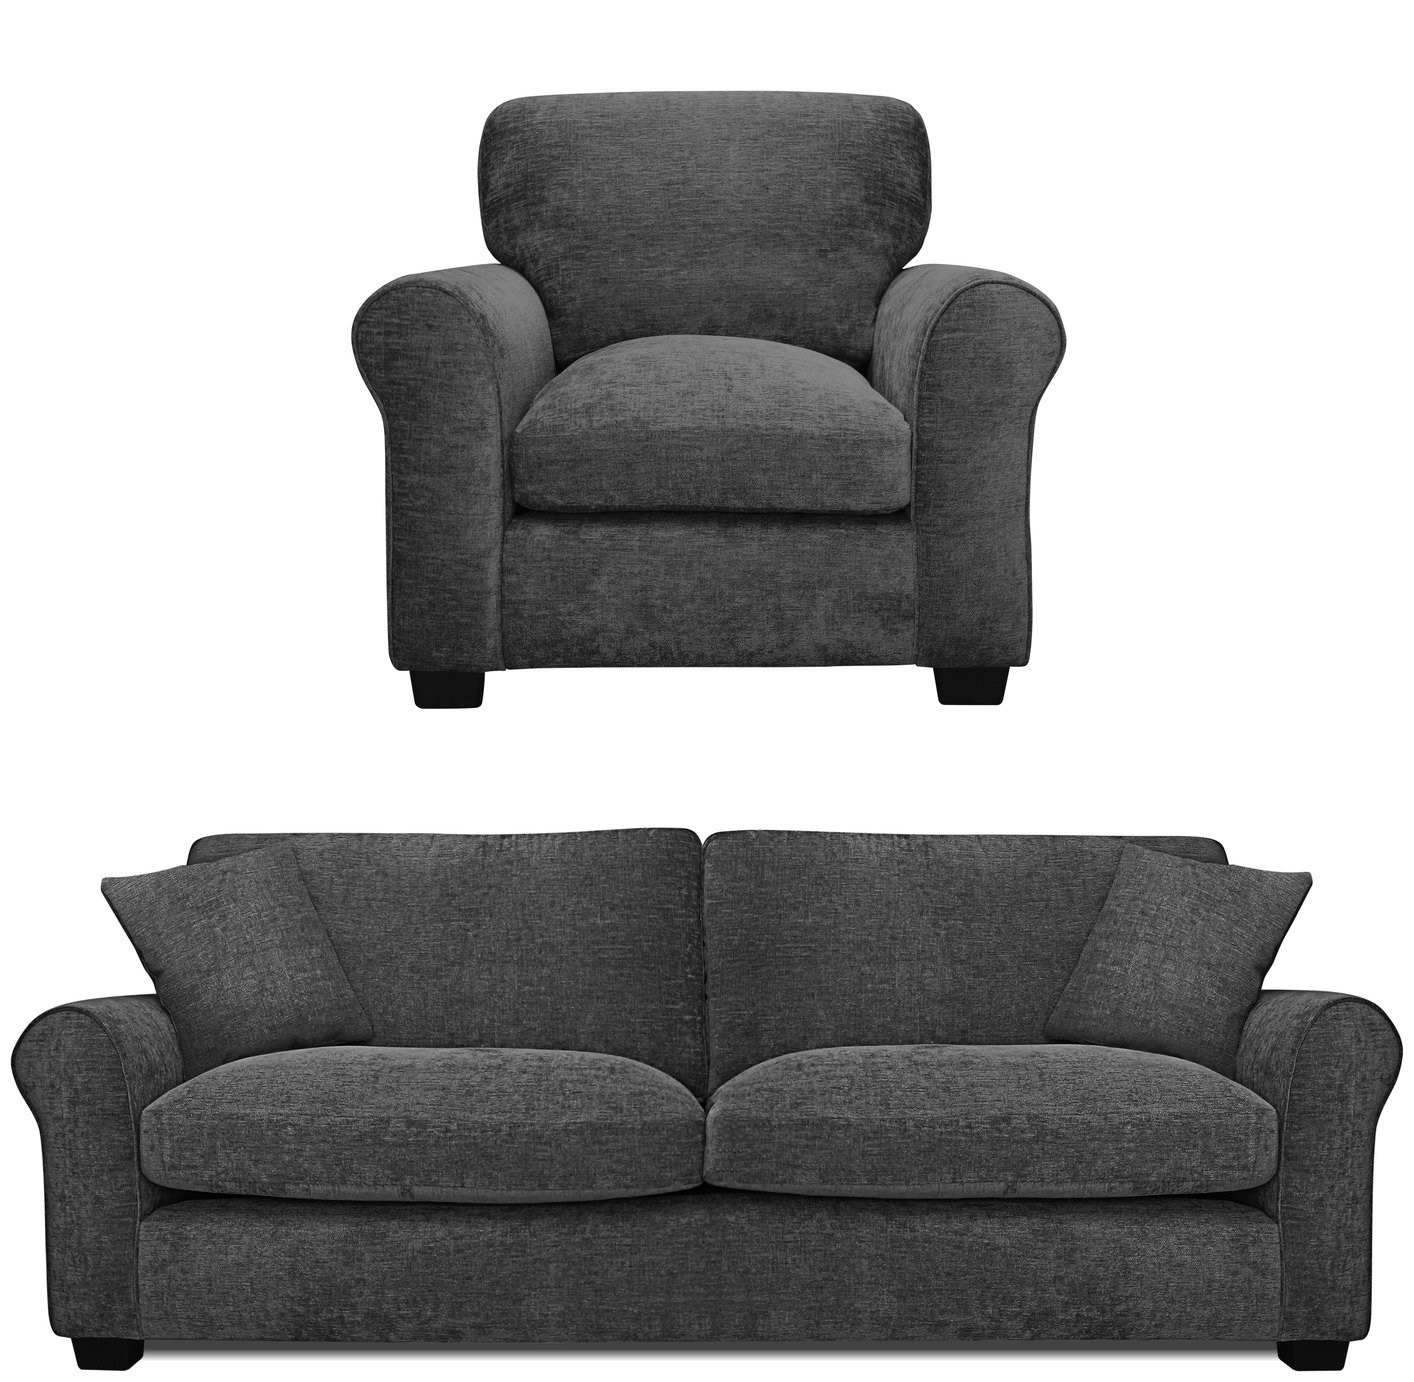 Argos Home Tammy Fabric Chair and 4 Seater Sofa - Charcoal